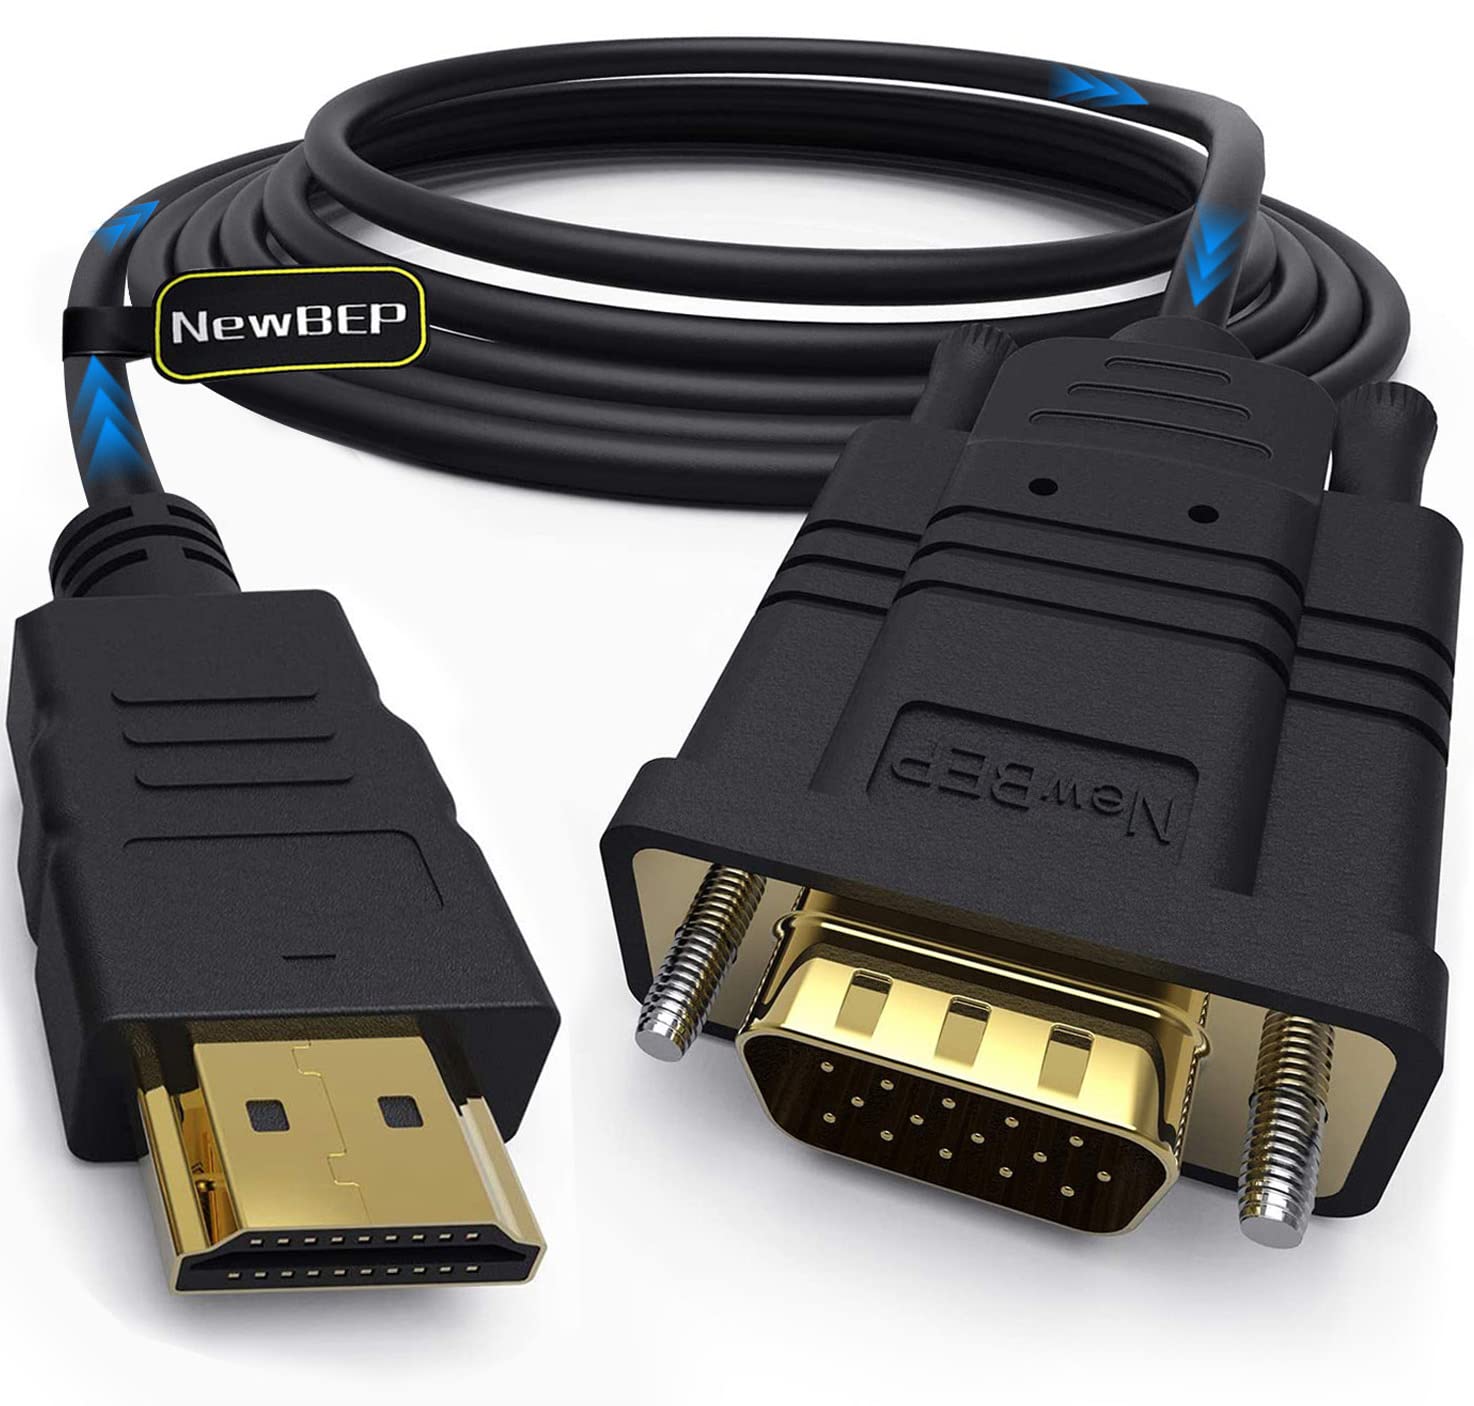 Make sure that all video cables (HDMI, VGA, etc.) are securely connected to both the TV and the source device (cable box, DVD player, etc.).
Replace any damaged or frayed cables.